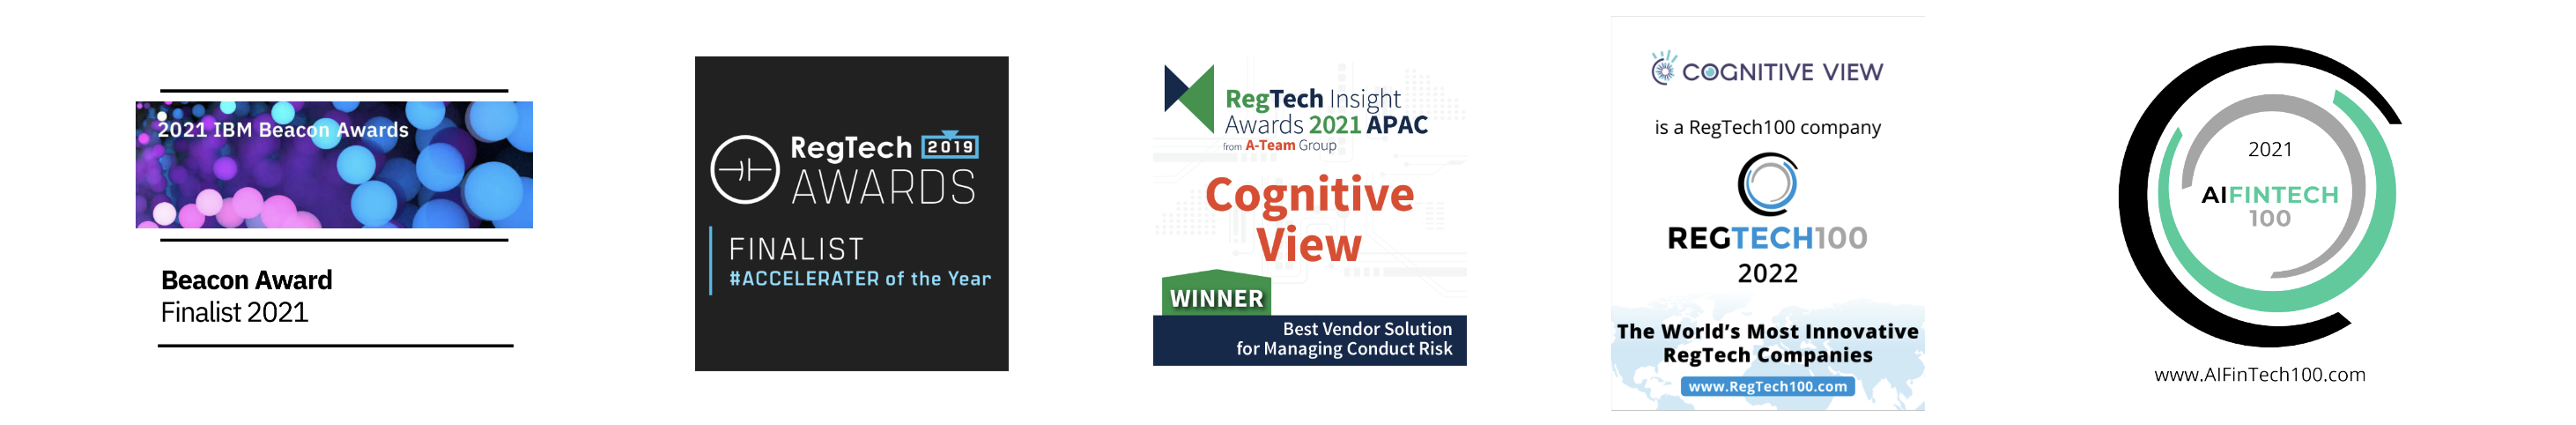 Recognition for cognitive view